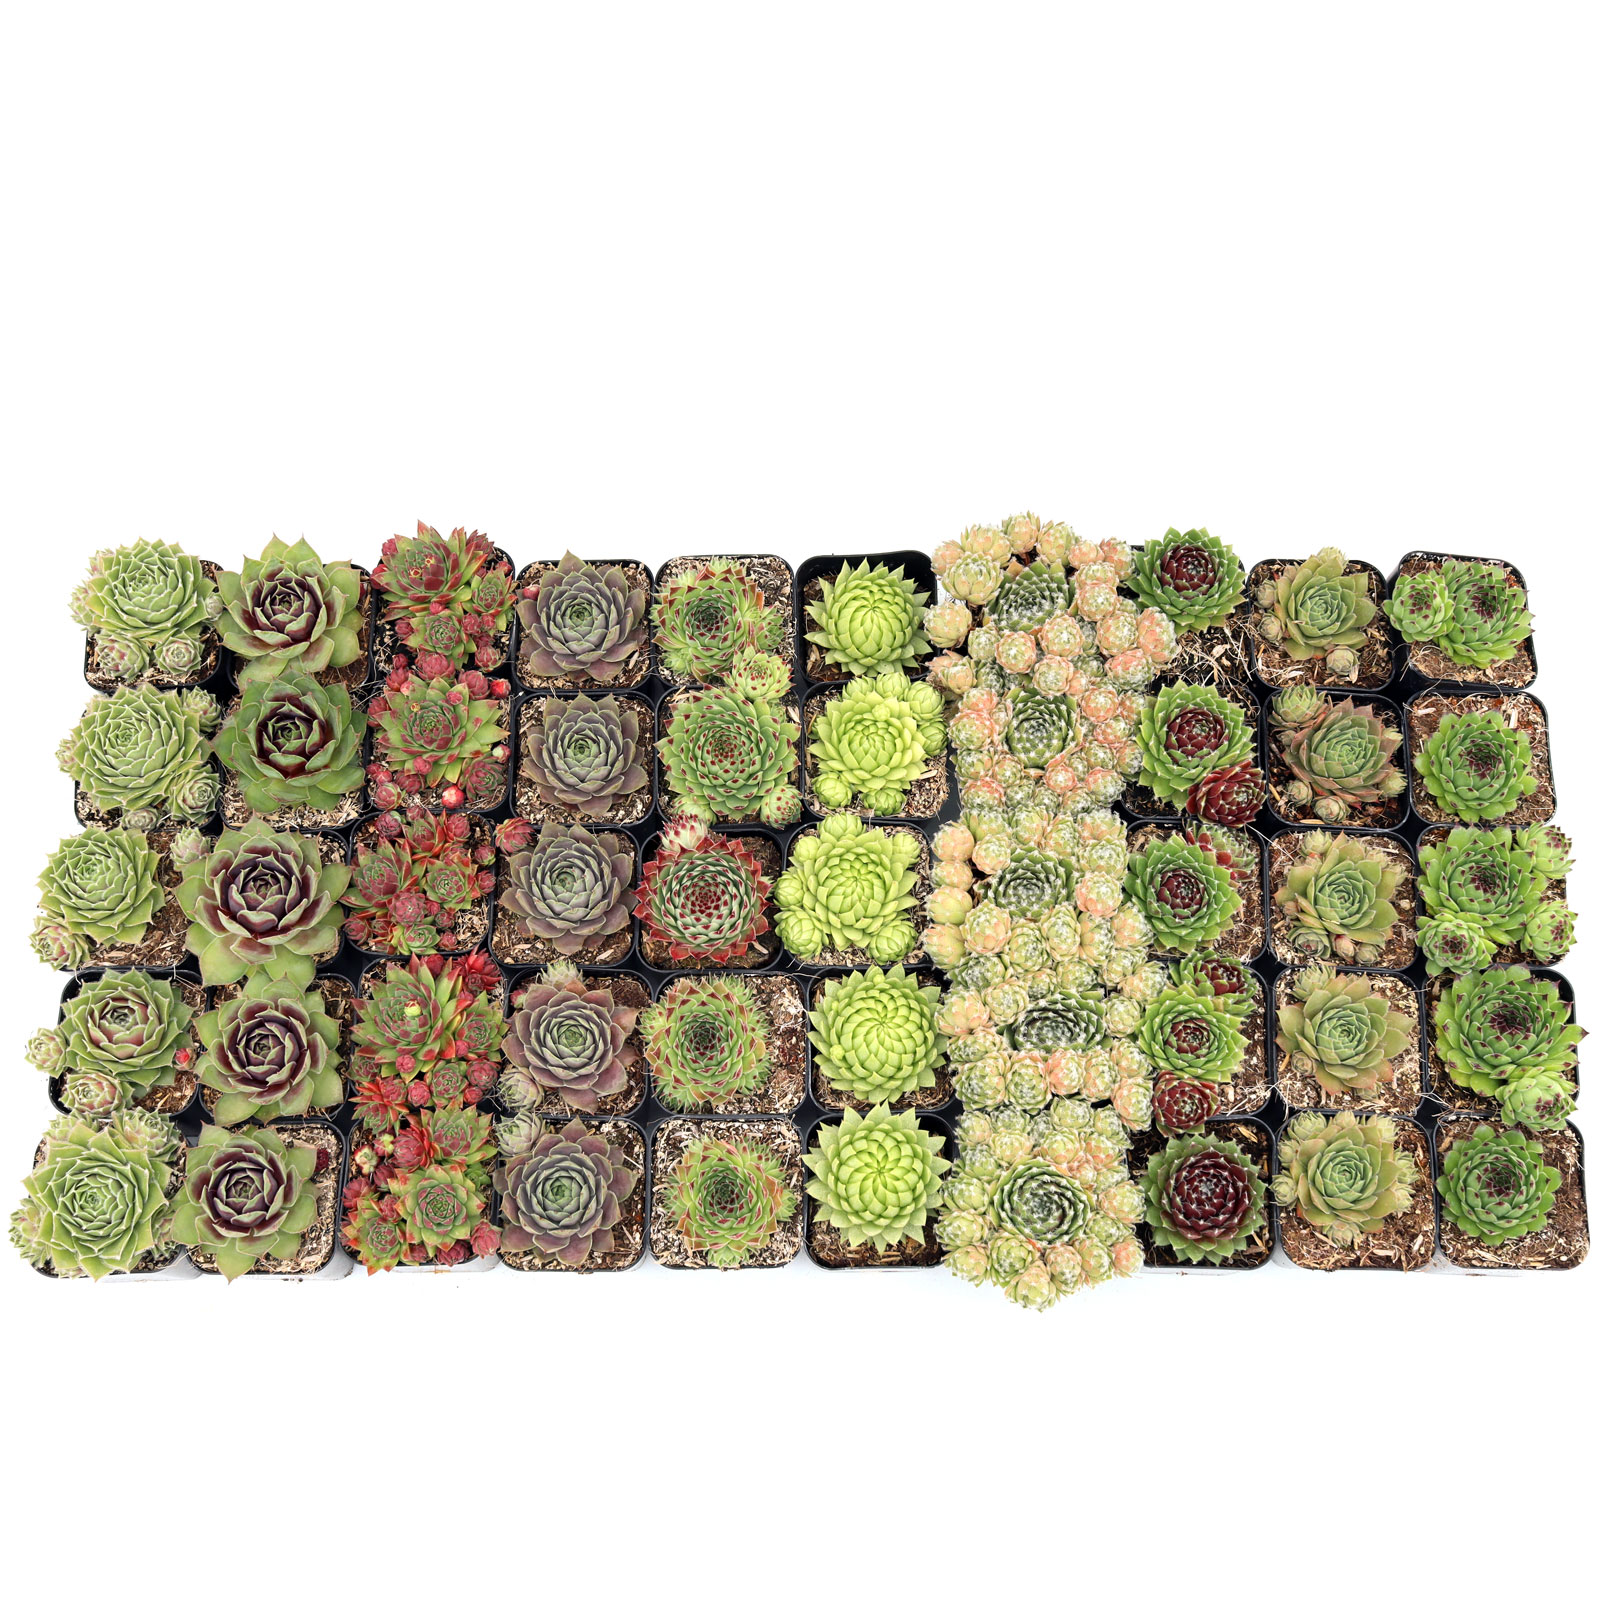 Sempervivum (Hens & Chicks) Bulk 50 Tray - 10 Types w/ ID - 2in Pots Questions & Answers